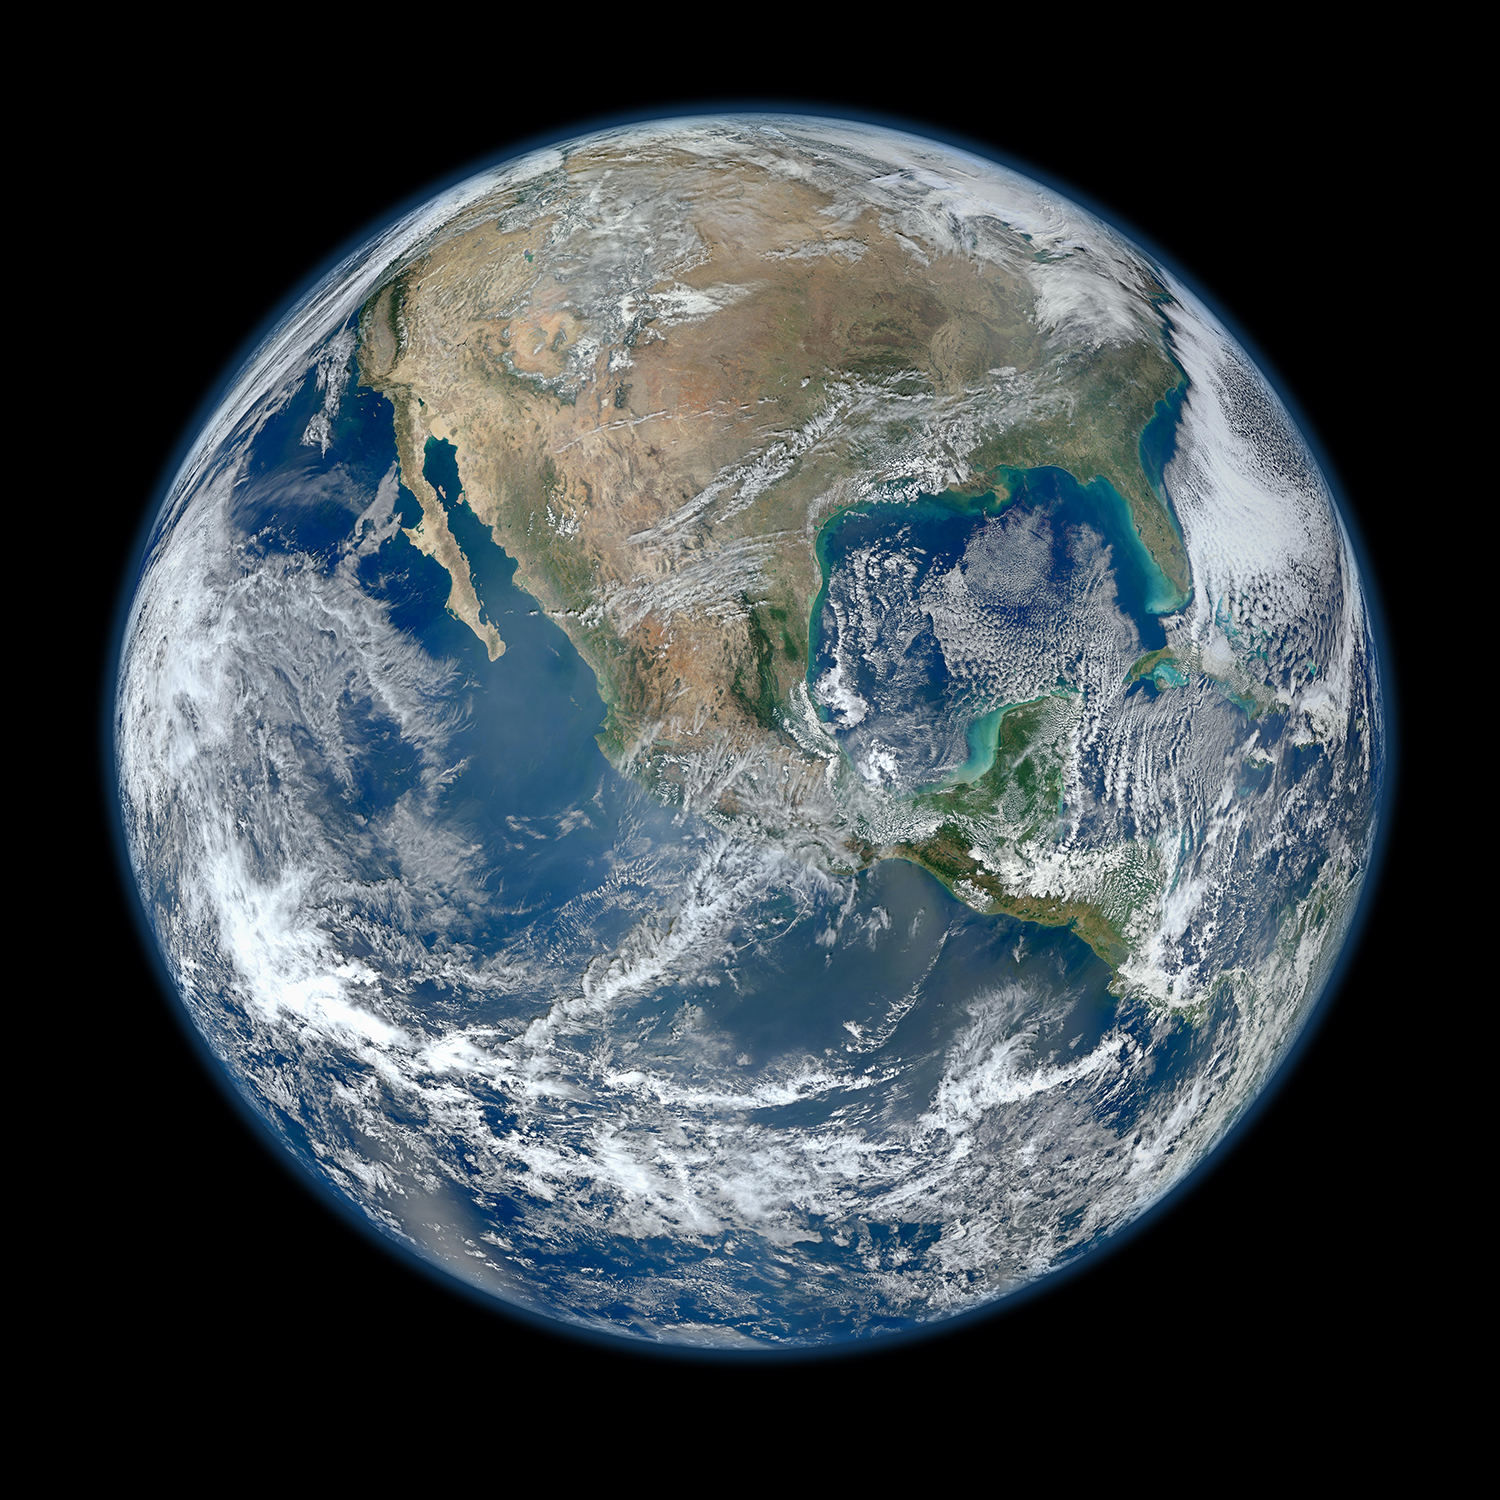 detailed-images-of-the-earth-blue-marble-earth-montage.jpg